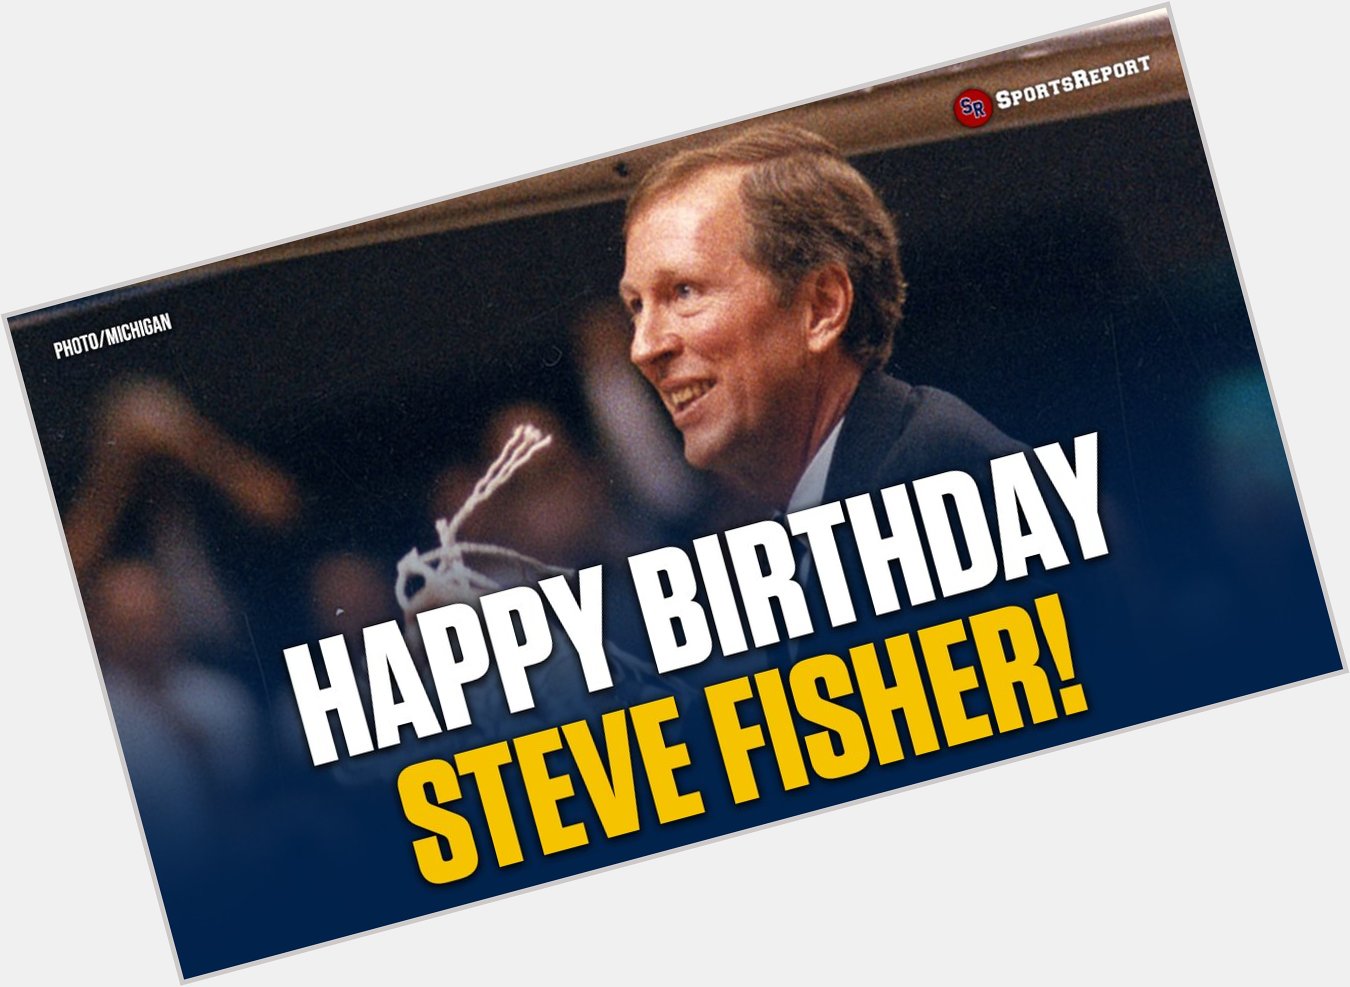  Fans, let\s wish Coaching great Steve Fisher a Happy Birthday! 